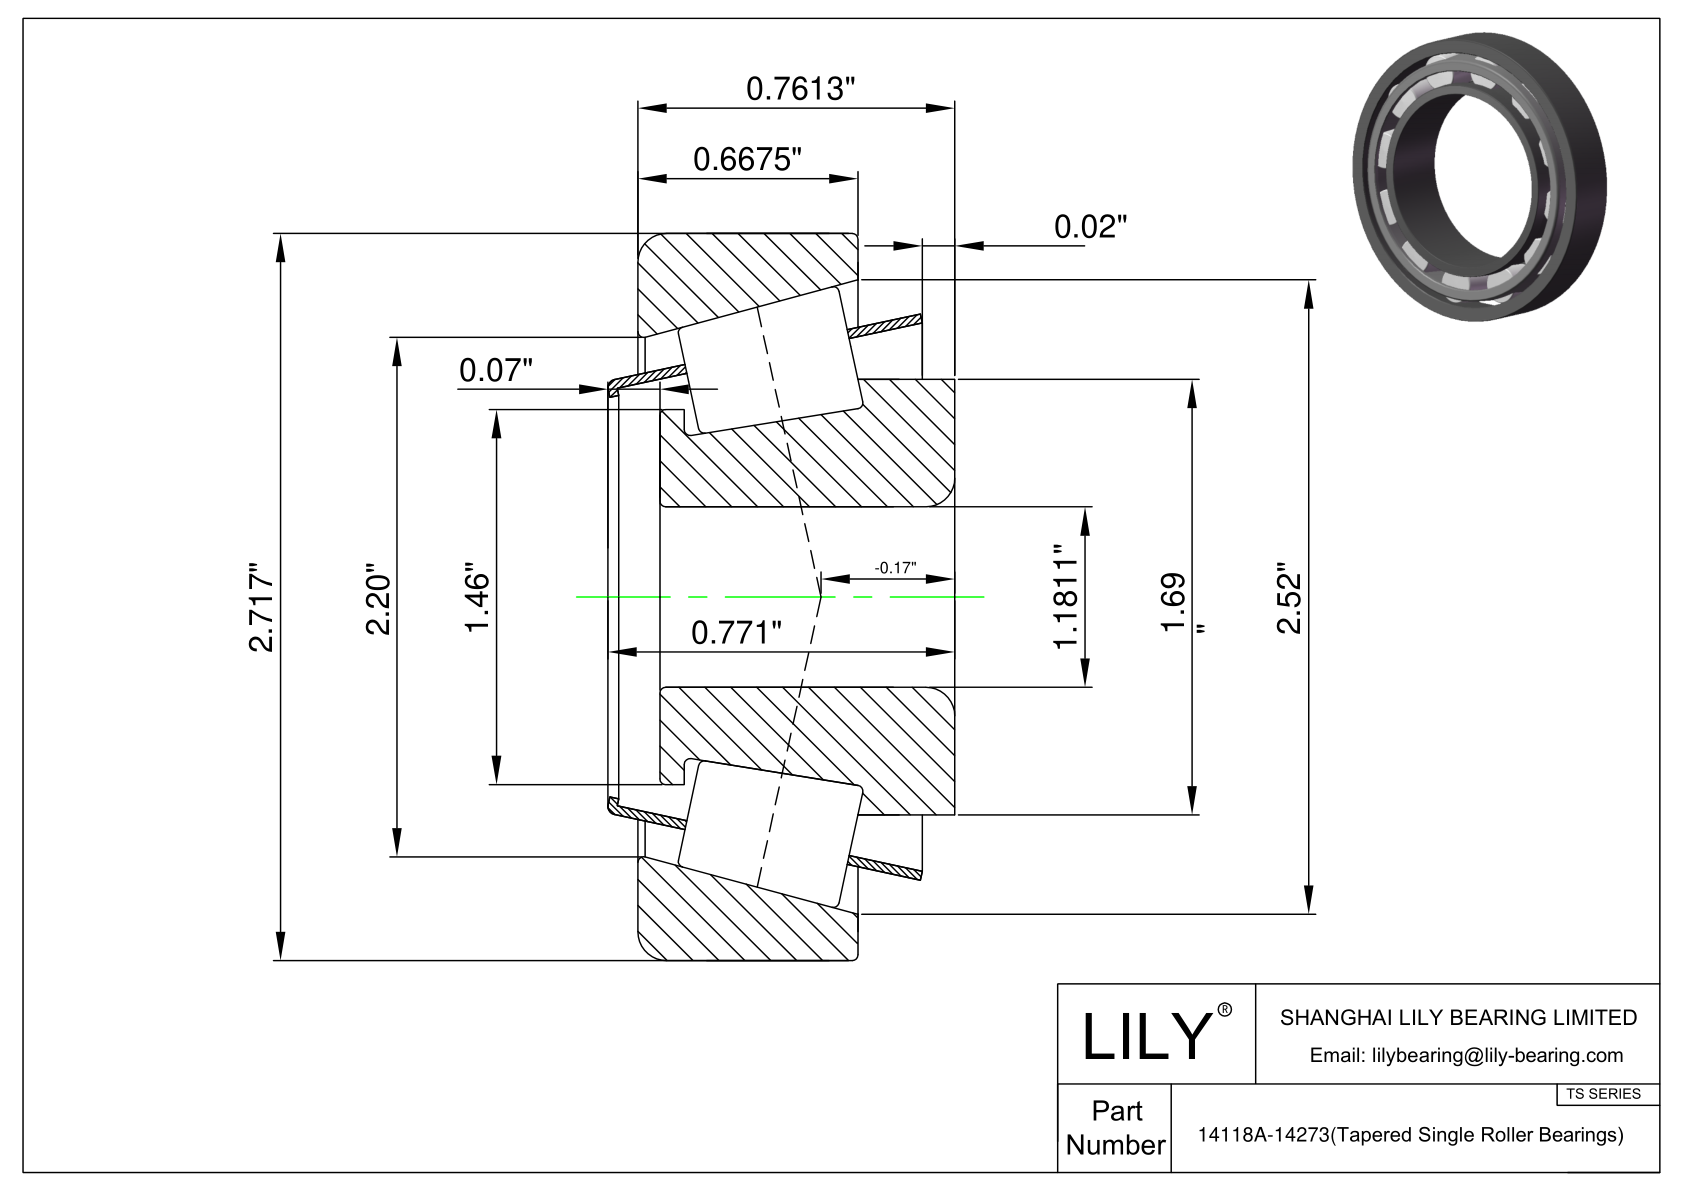 14118A-14273 TS (Tapered Single Roller Bearings) (Imperial) cad drawing